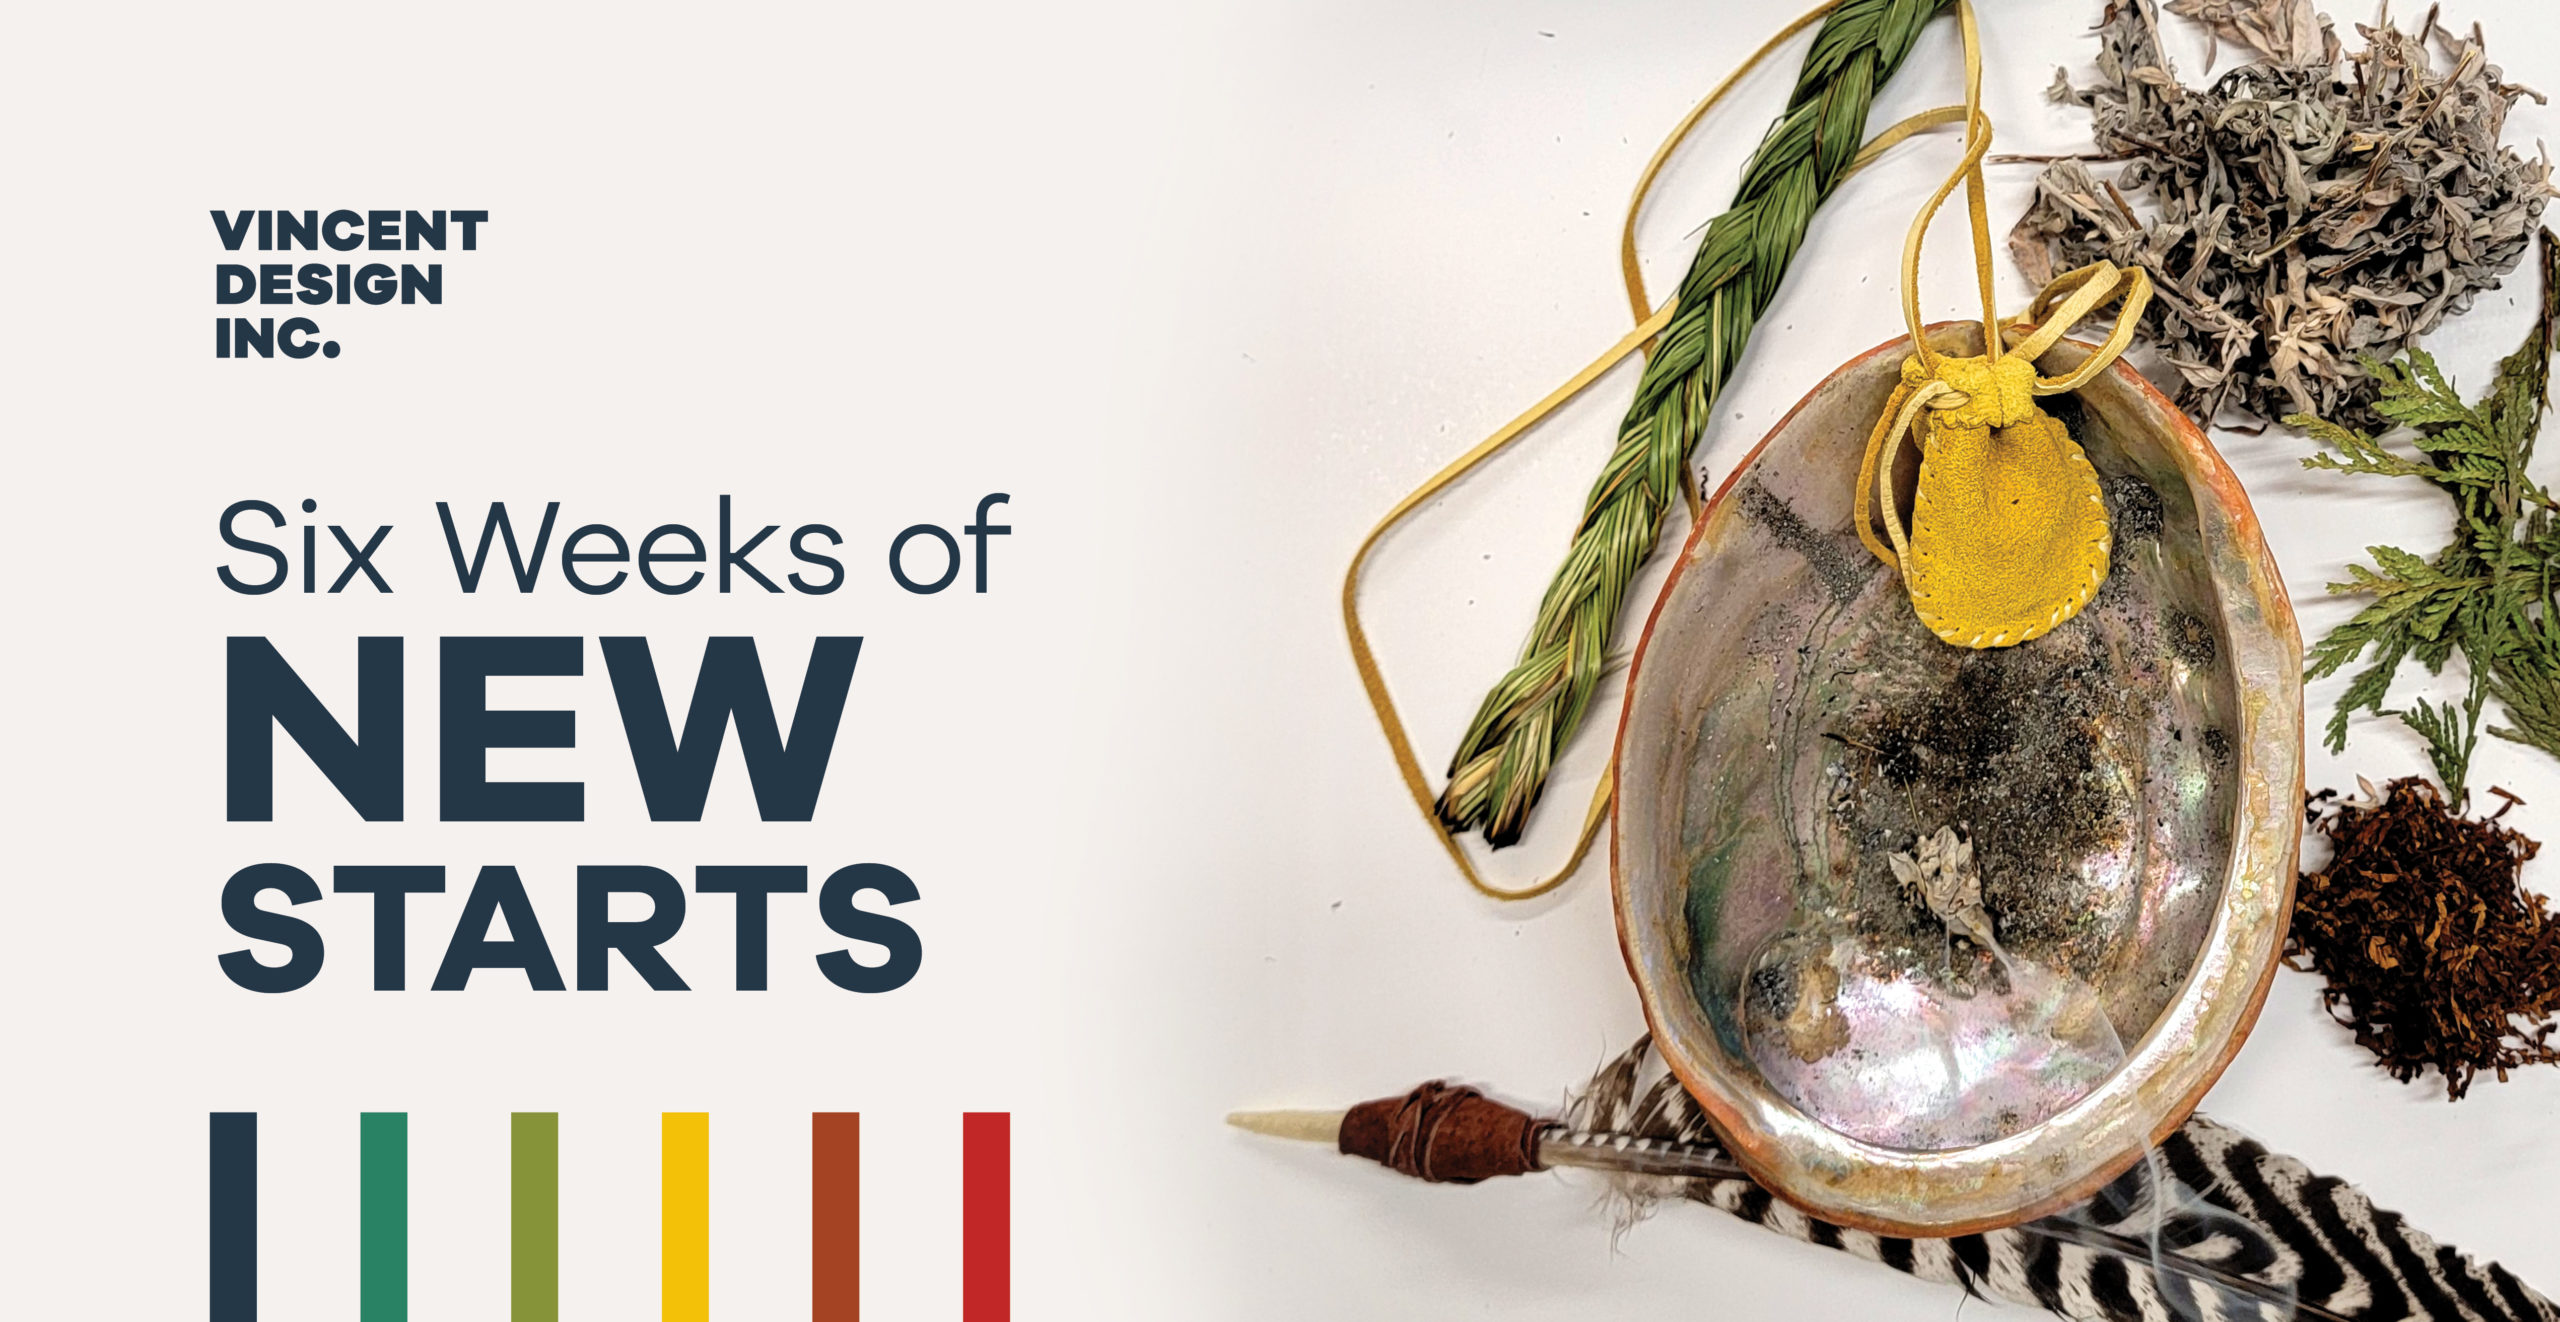 &quot;Six Weeks of New Starts&quot; on image with traditional medicines and smudge bowl